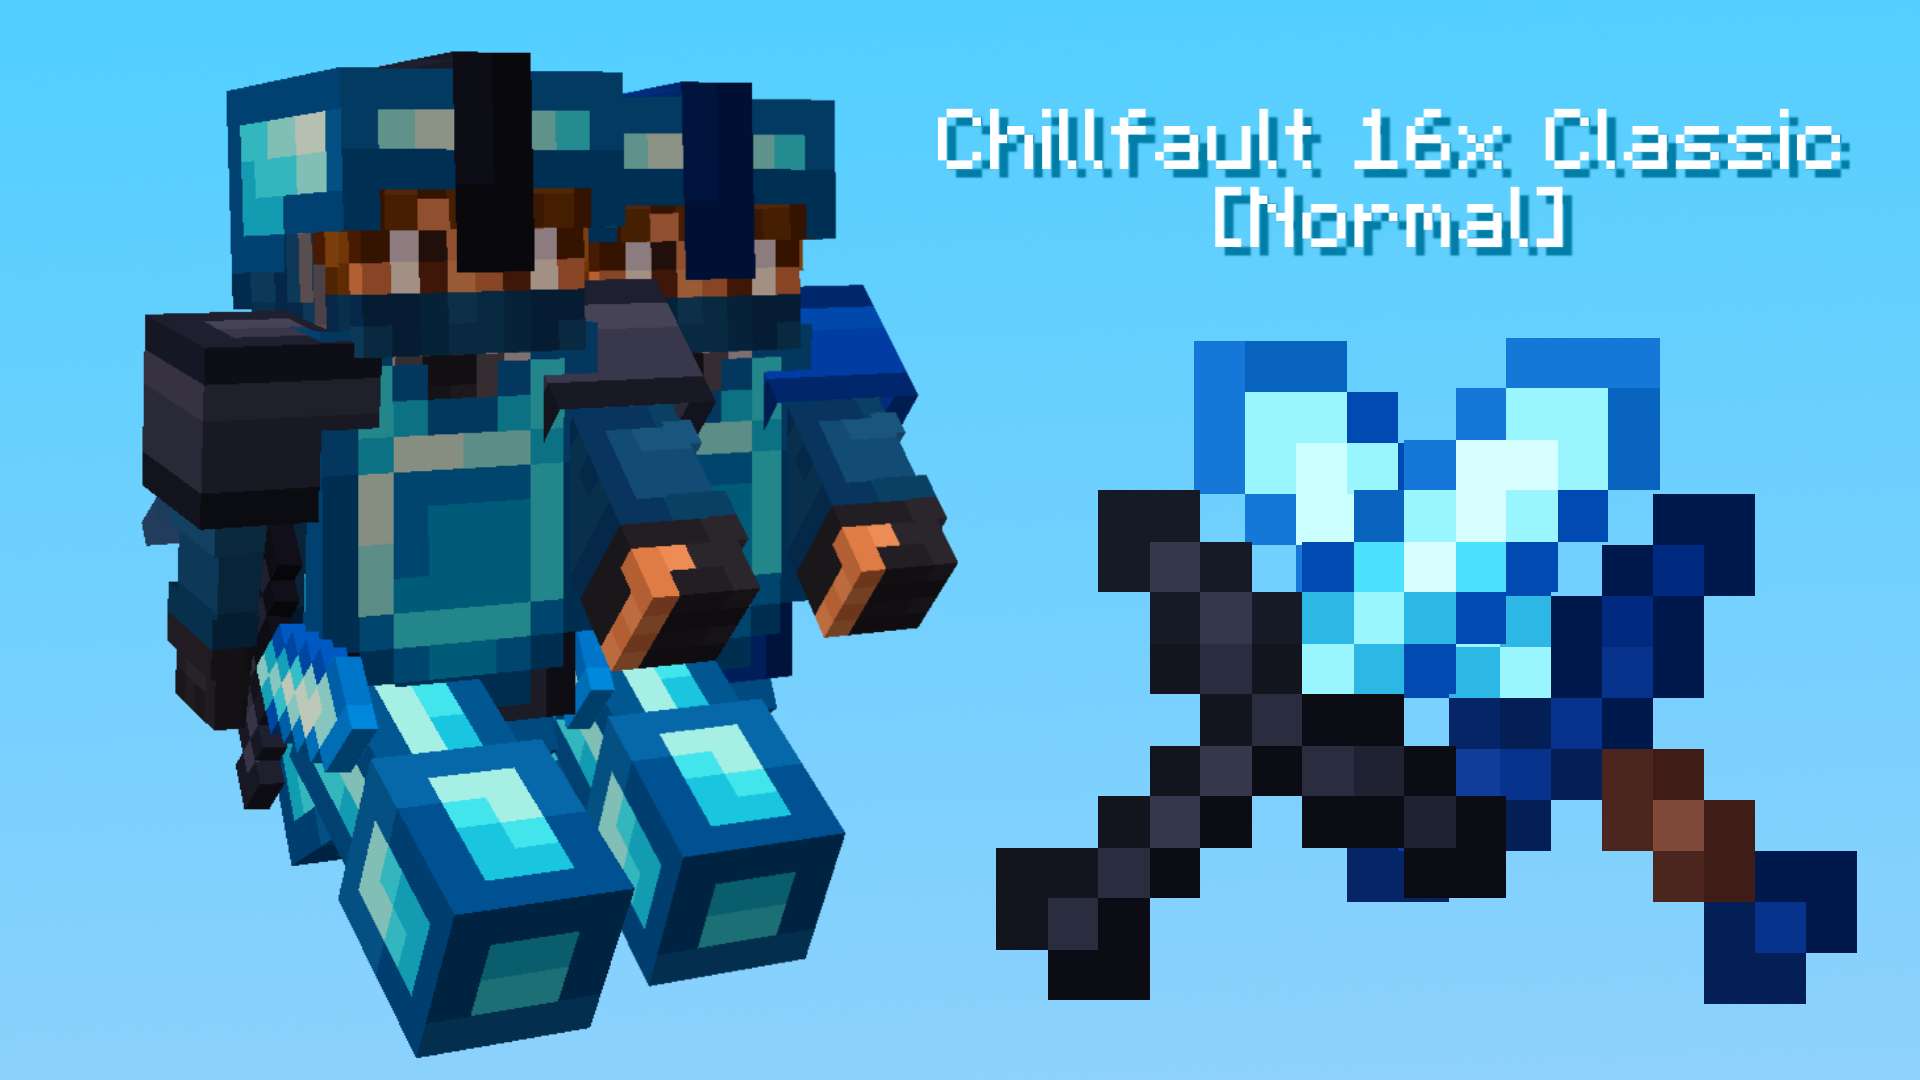 Chillfault 16x Classic [Normal] 16 by Jes13 on PvPRP